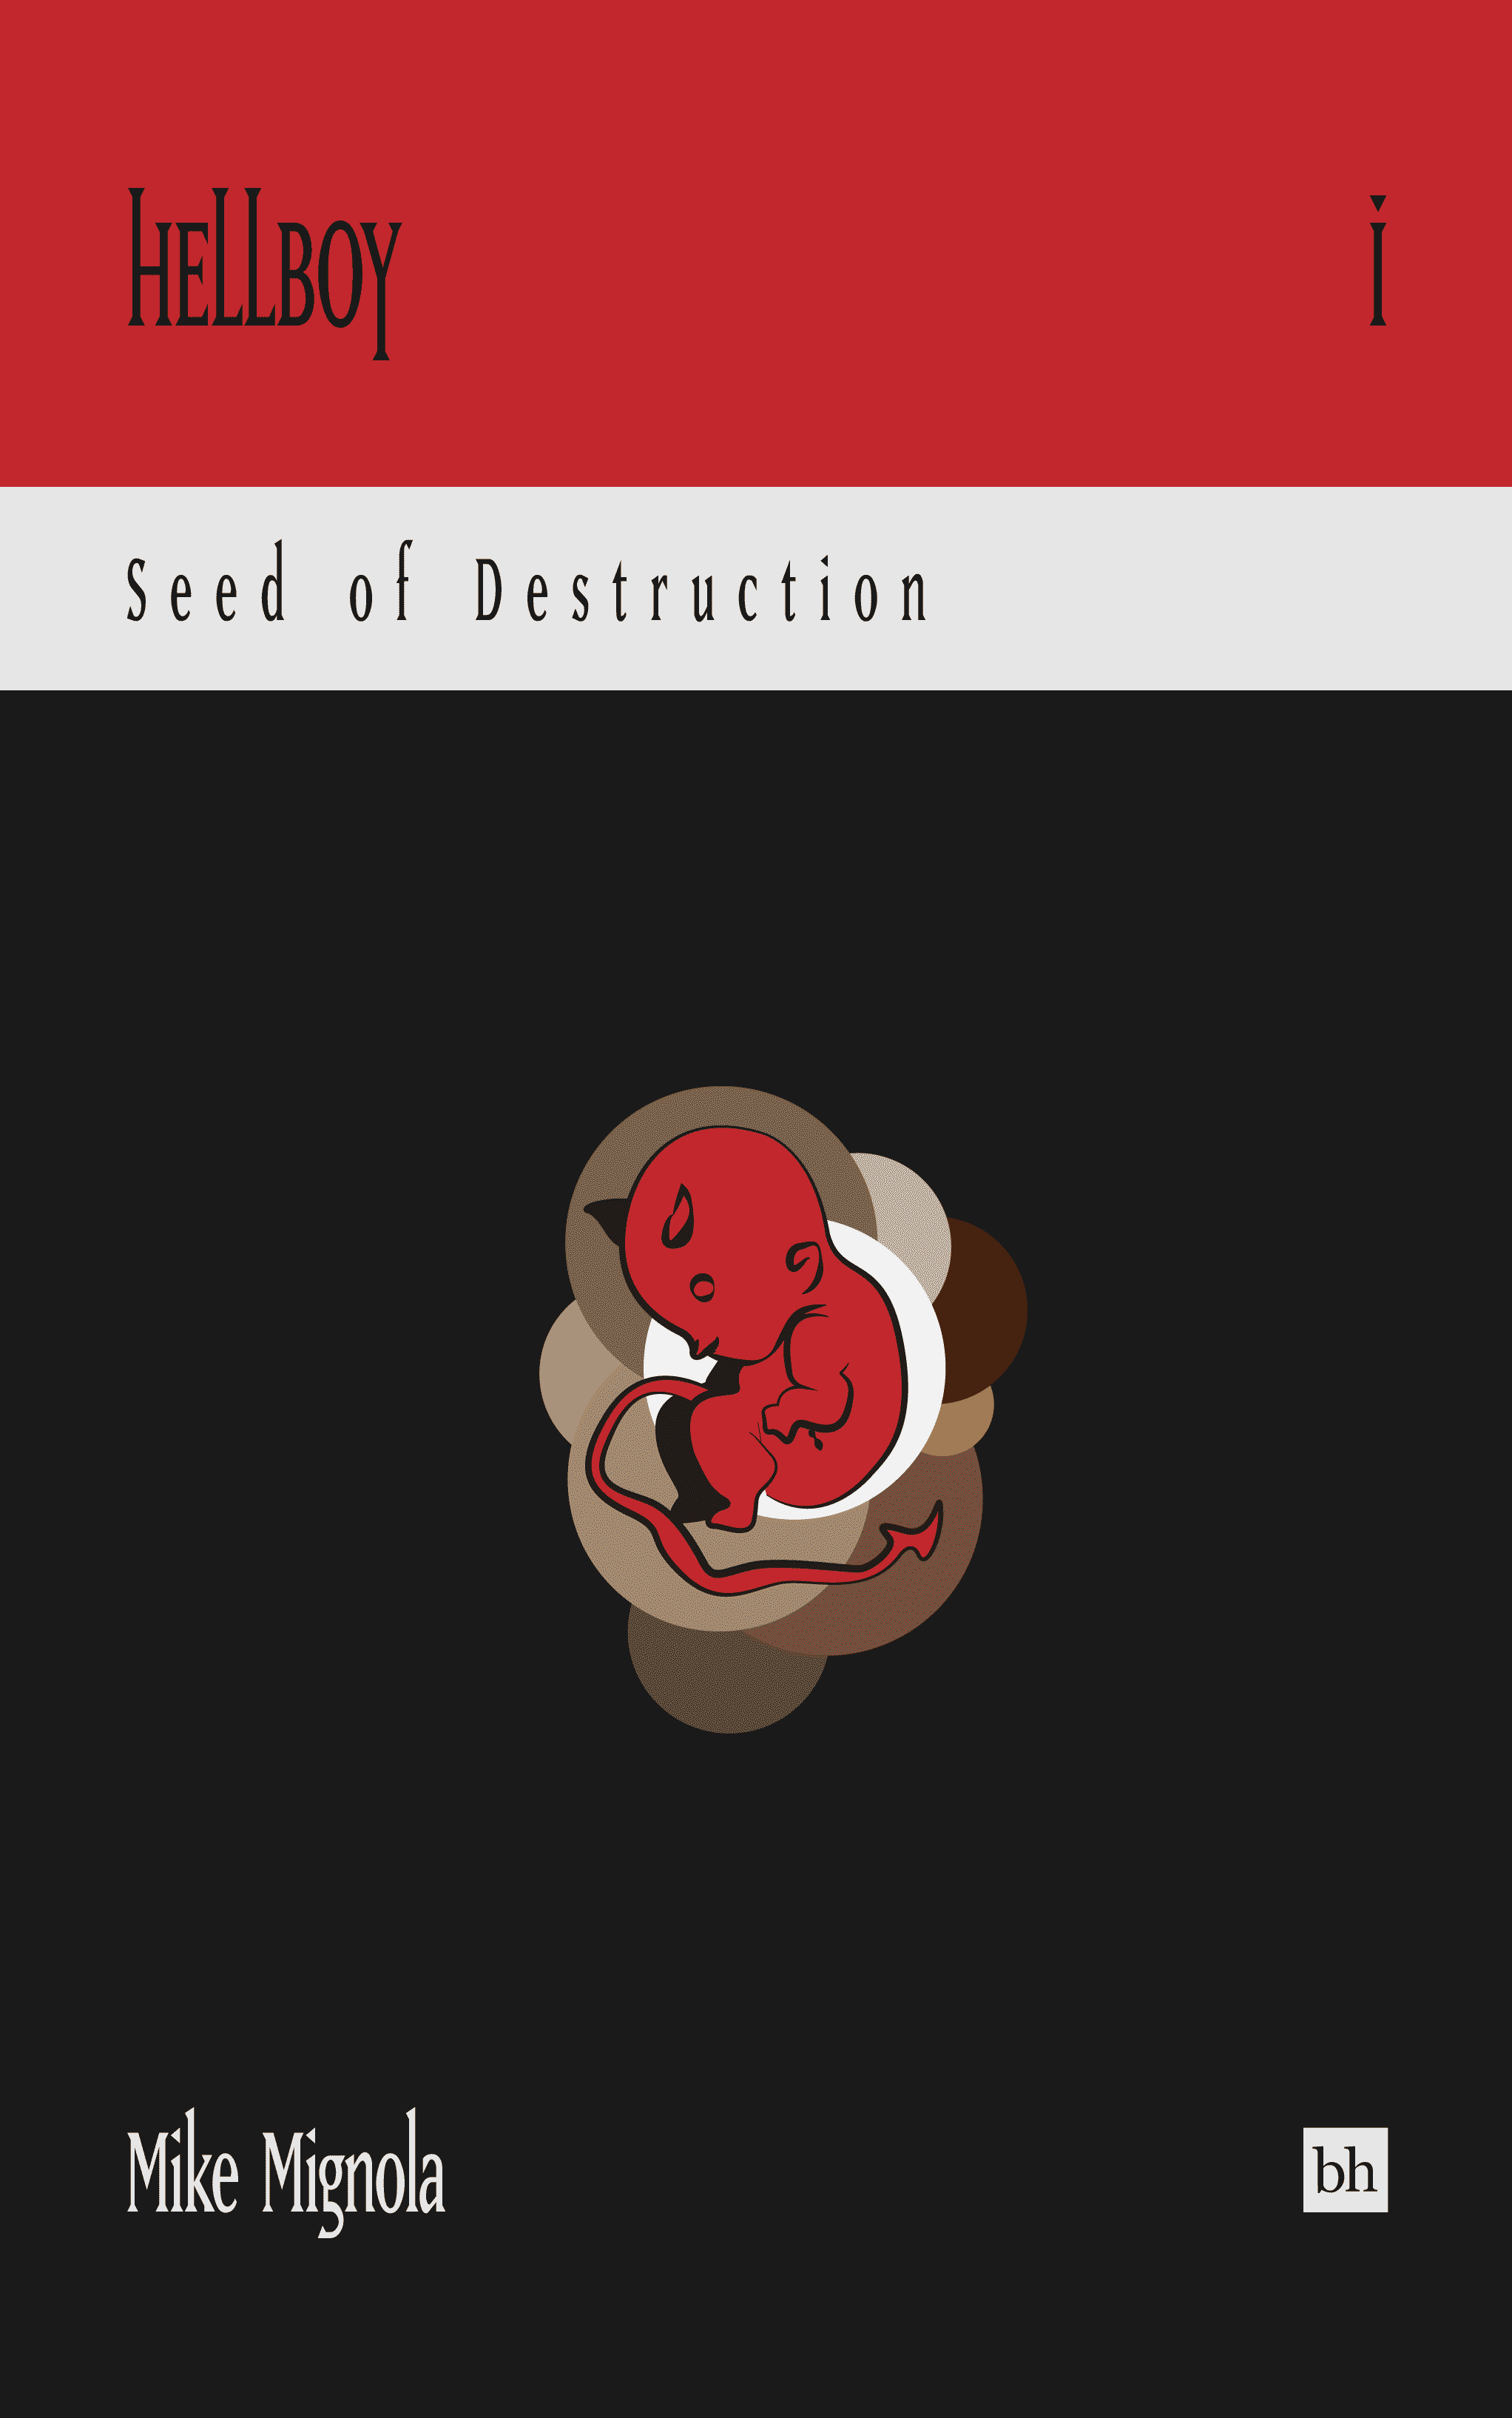 Book cover mock thumbnail for Hellboy: Seed of Destruction